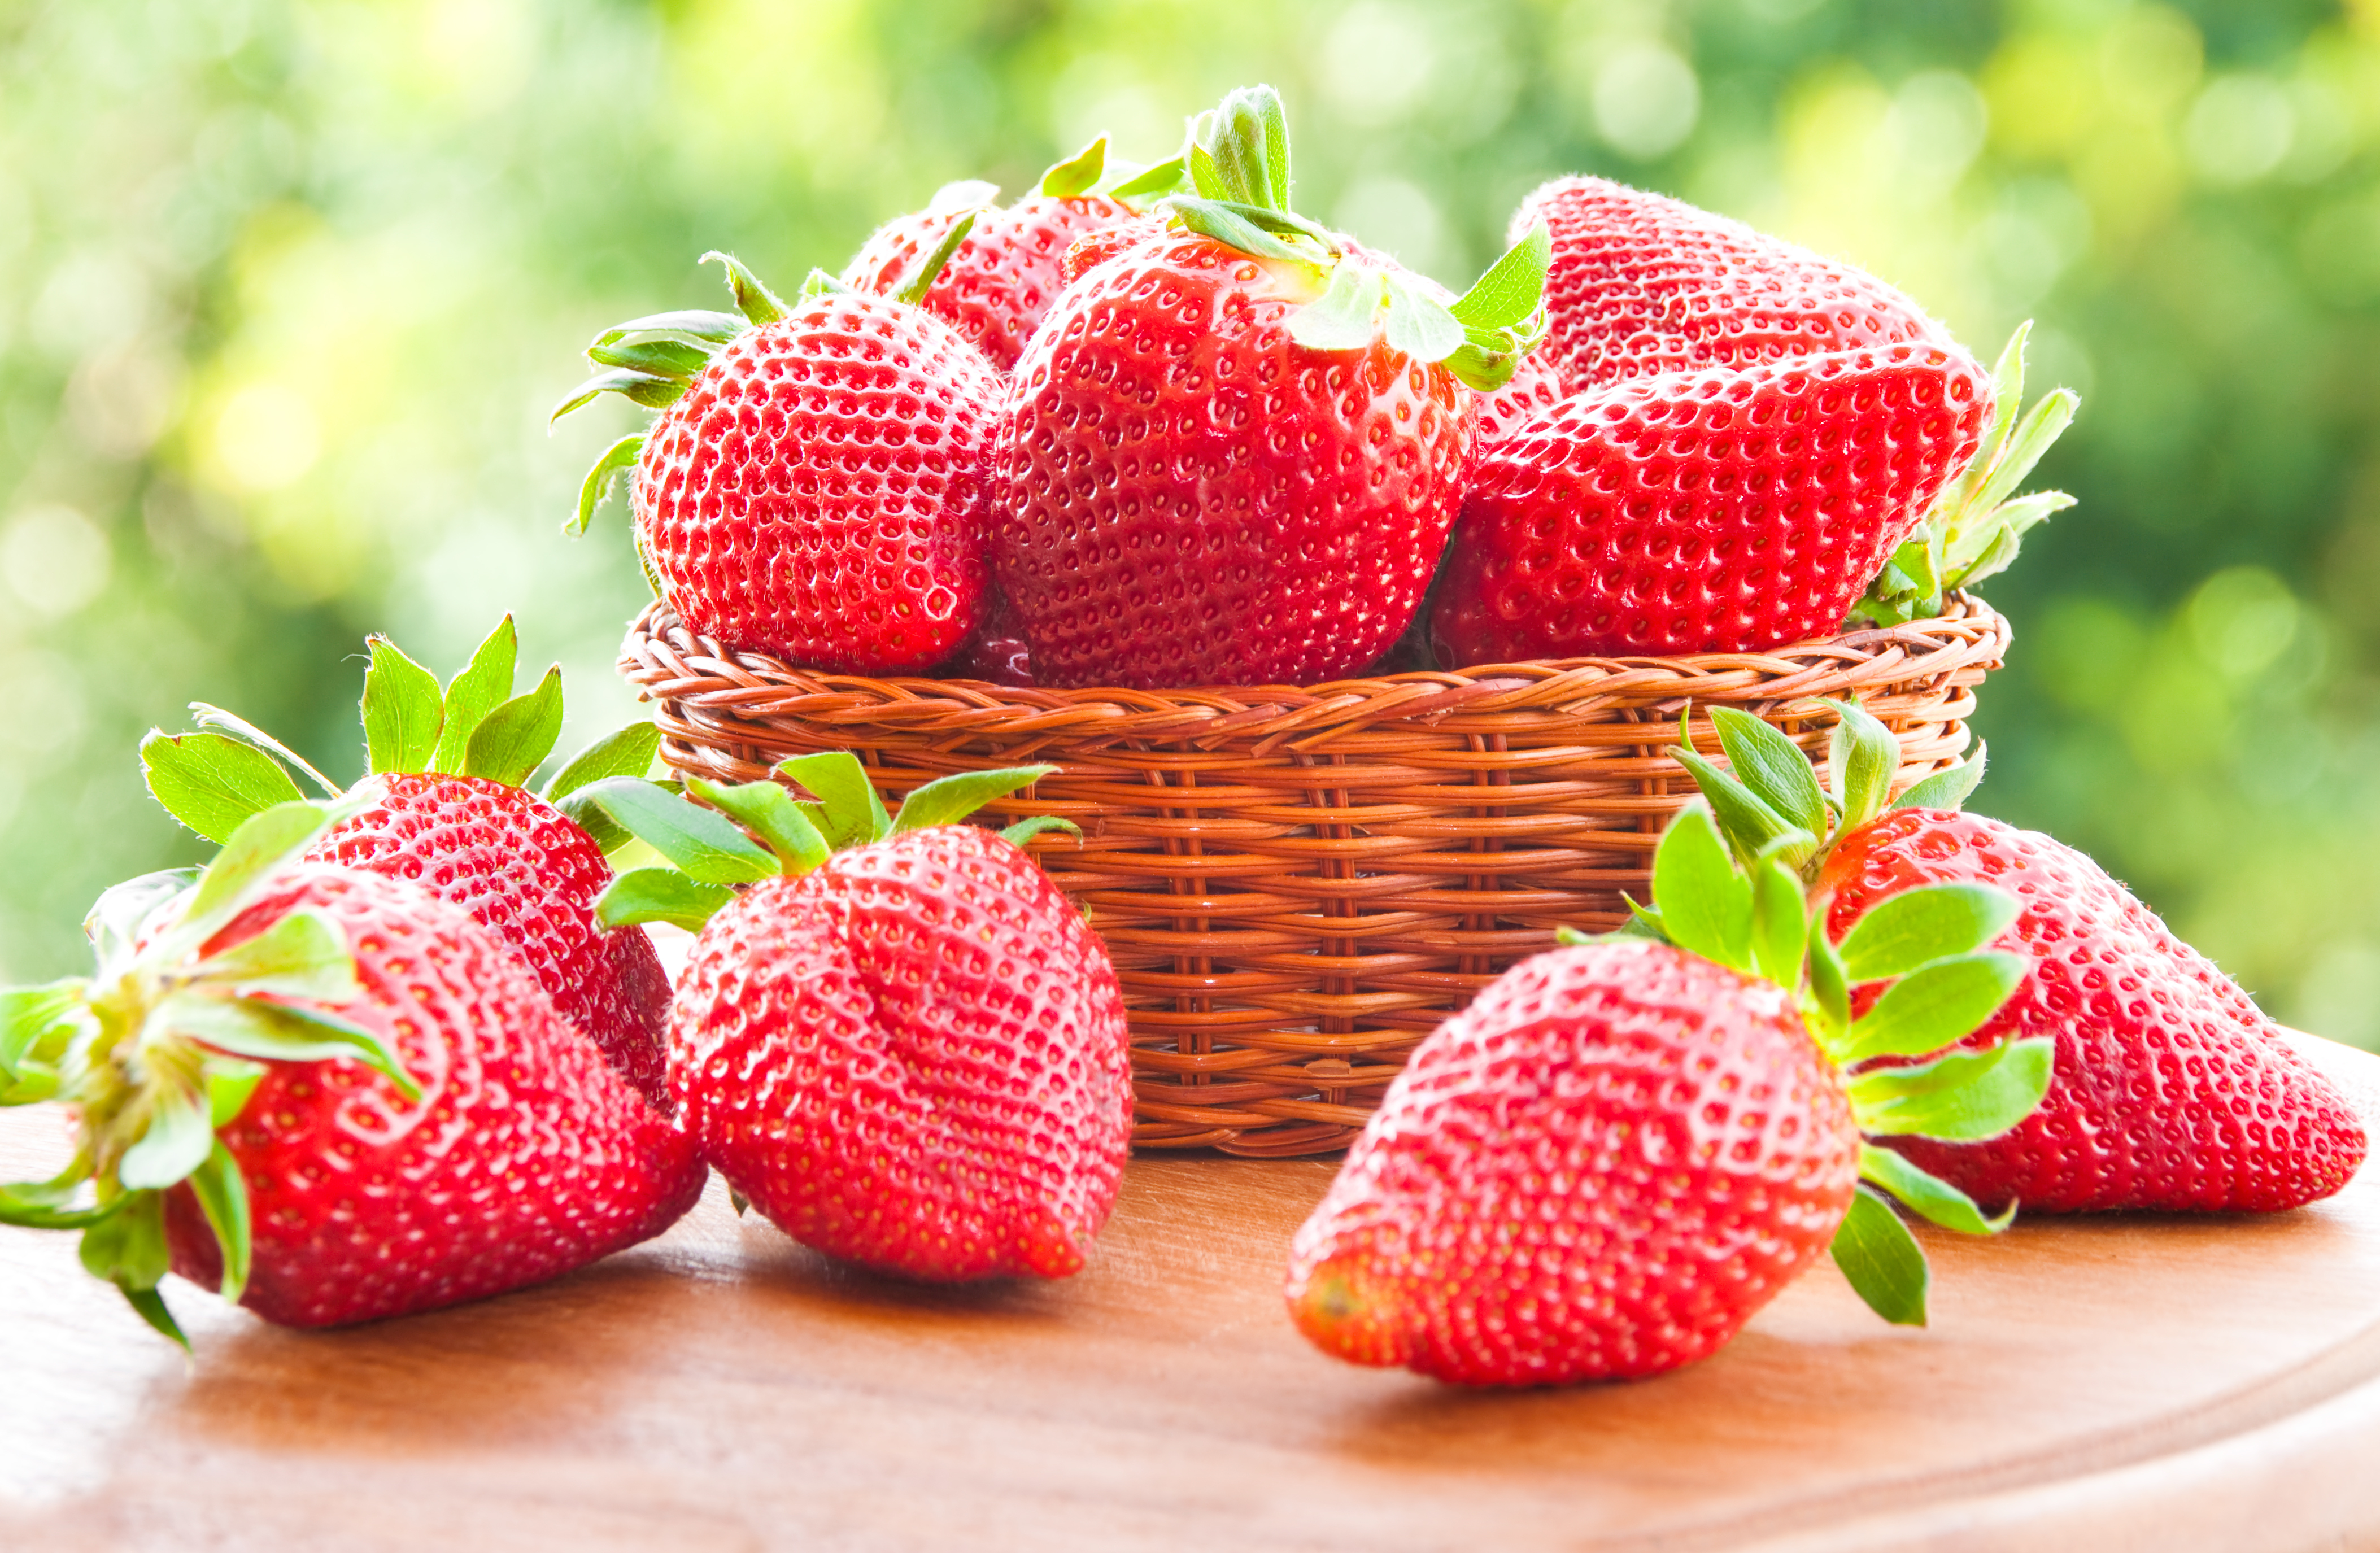 food, strawberry, basket, berry, red, fruits